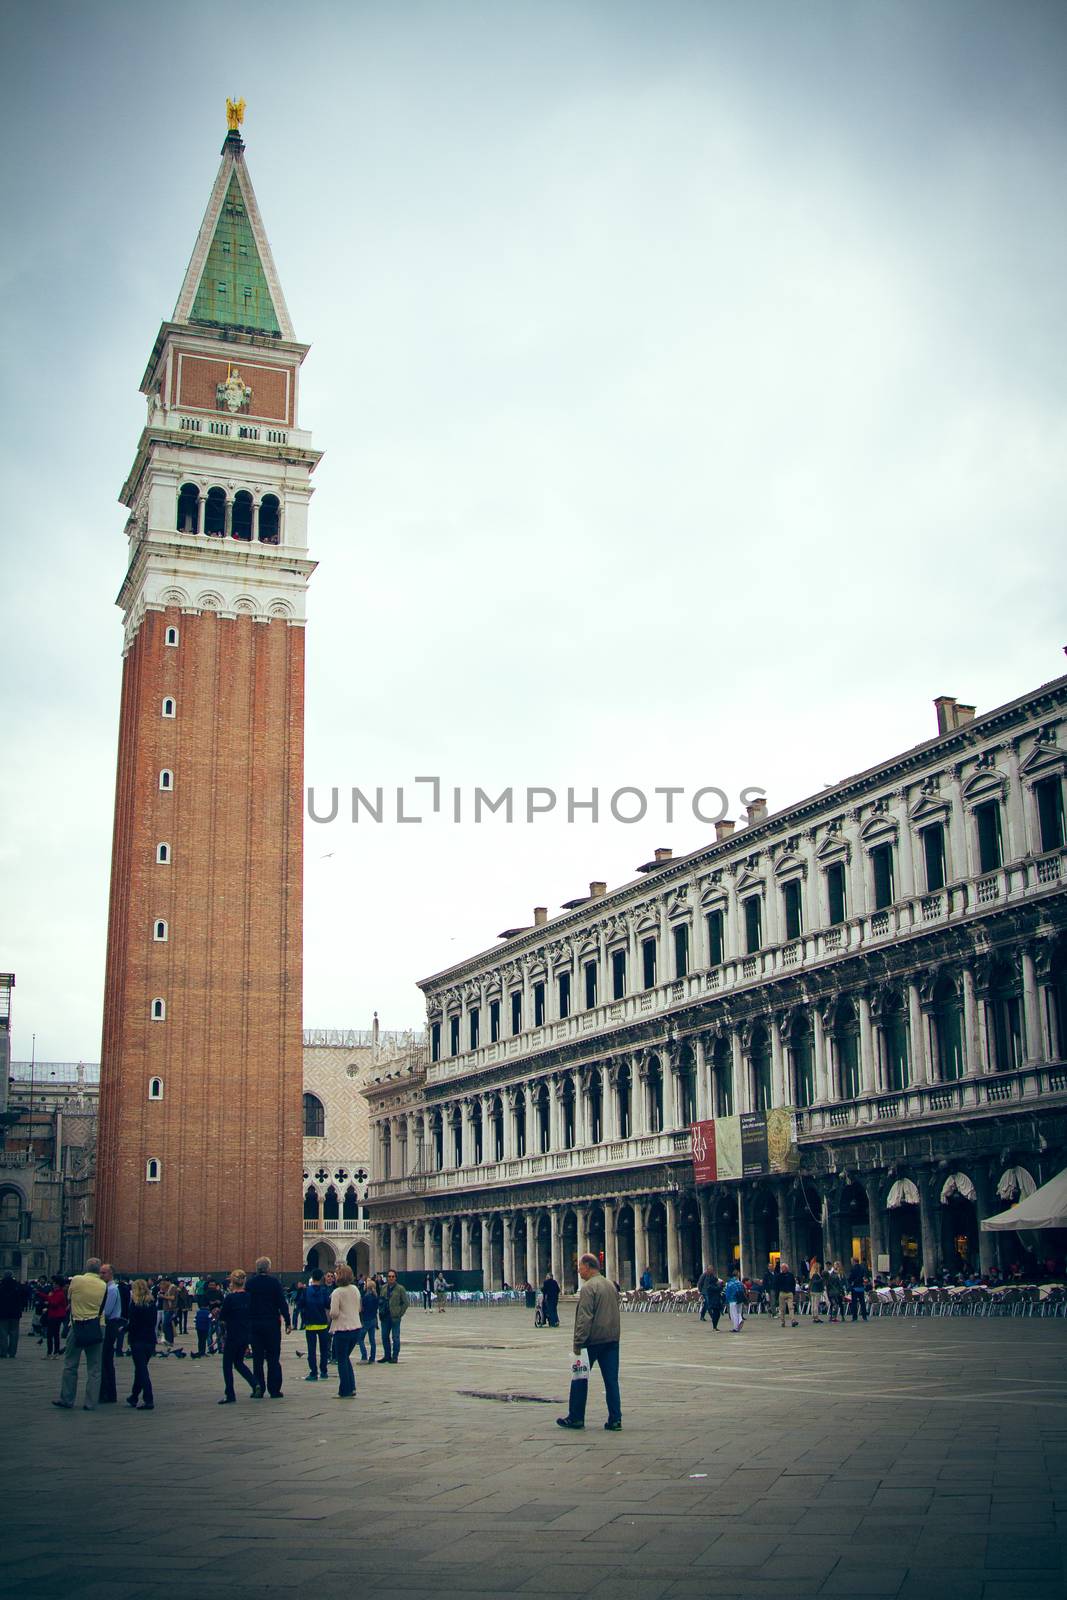 San Marco in Venice by samULvisuals